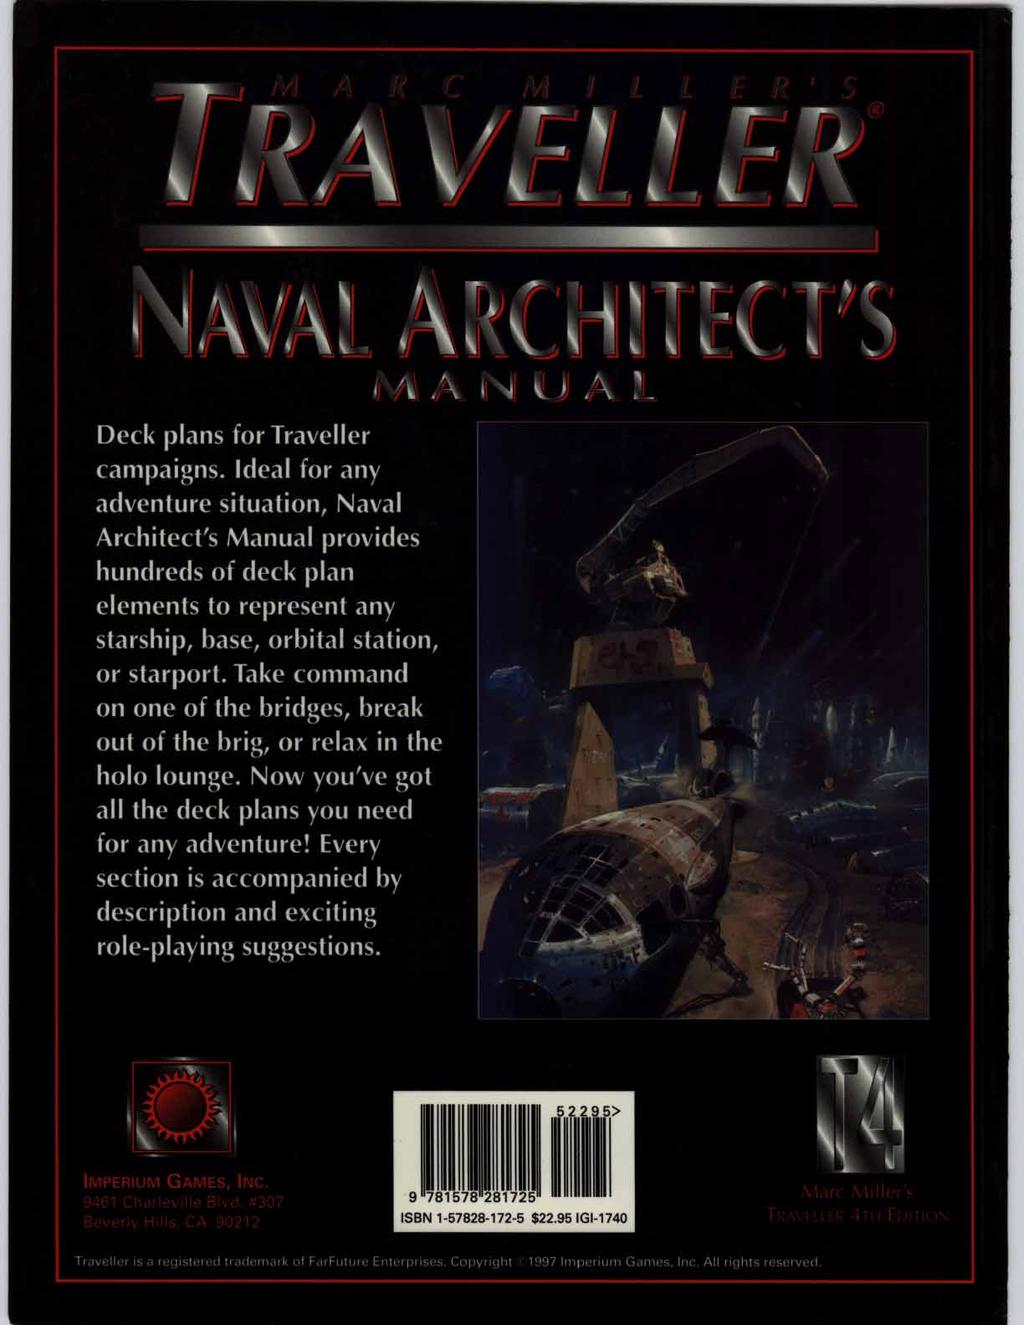 Deck plans for Traveller campaigns. Ideal for any venture situation, Naval rchitect s Manual provides hundreds of deck plan elements to represent any starship, base, orbital station, or starport.